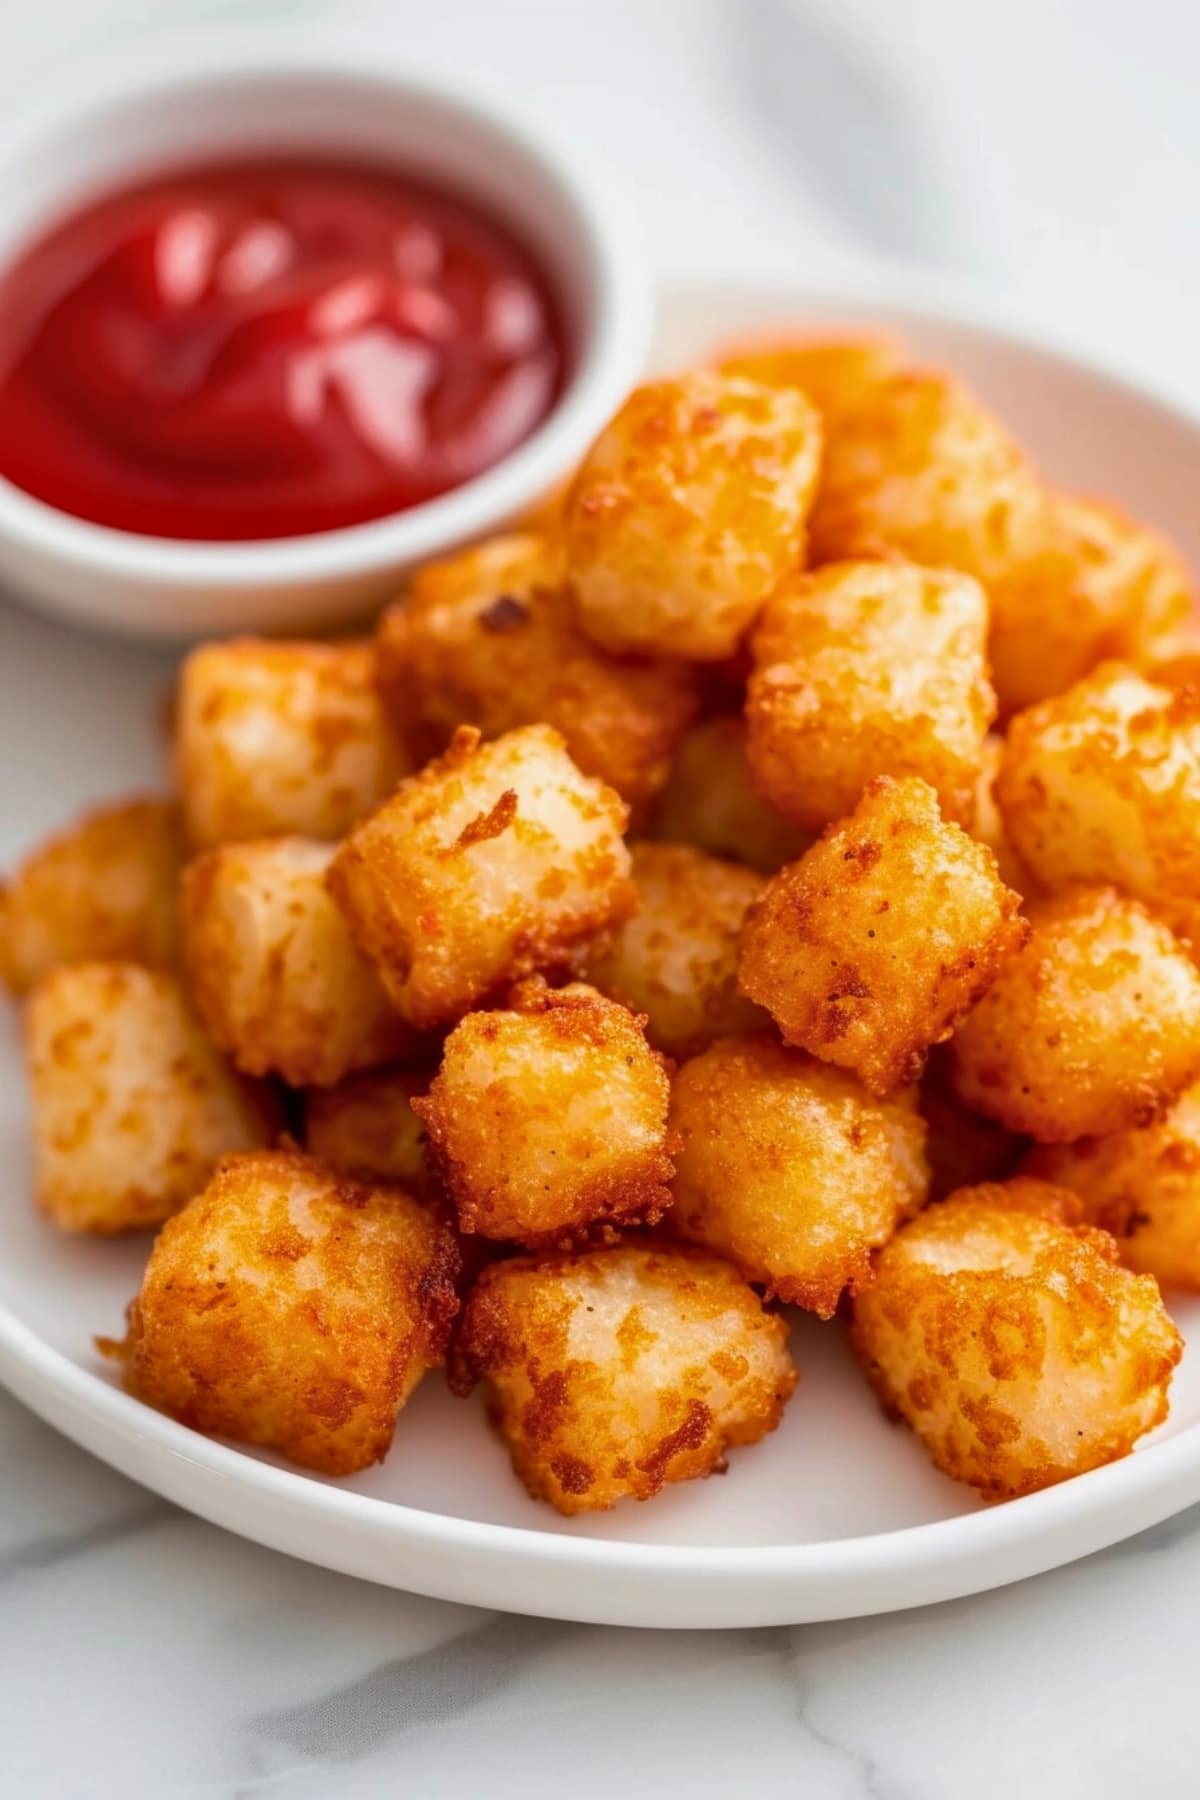 Pile of air fryer tater tots on a plate with ketchup on the side